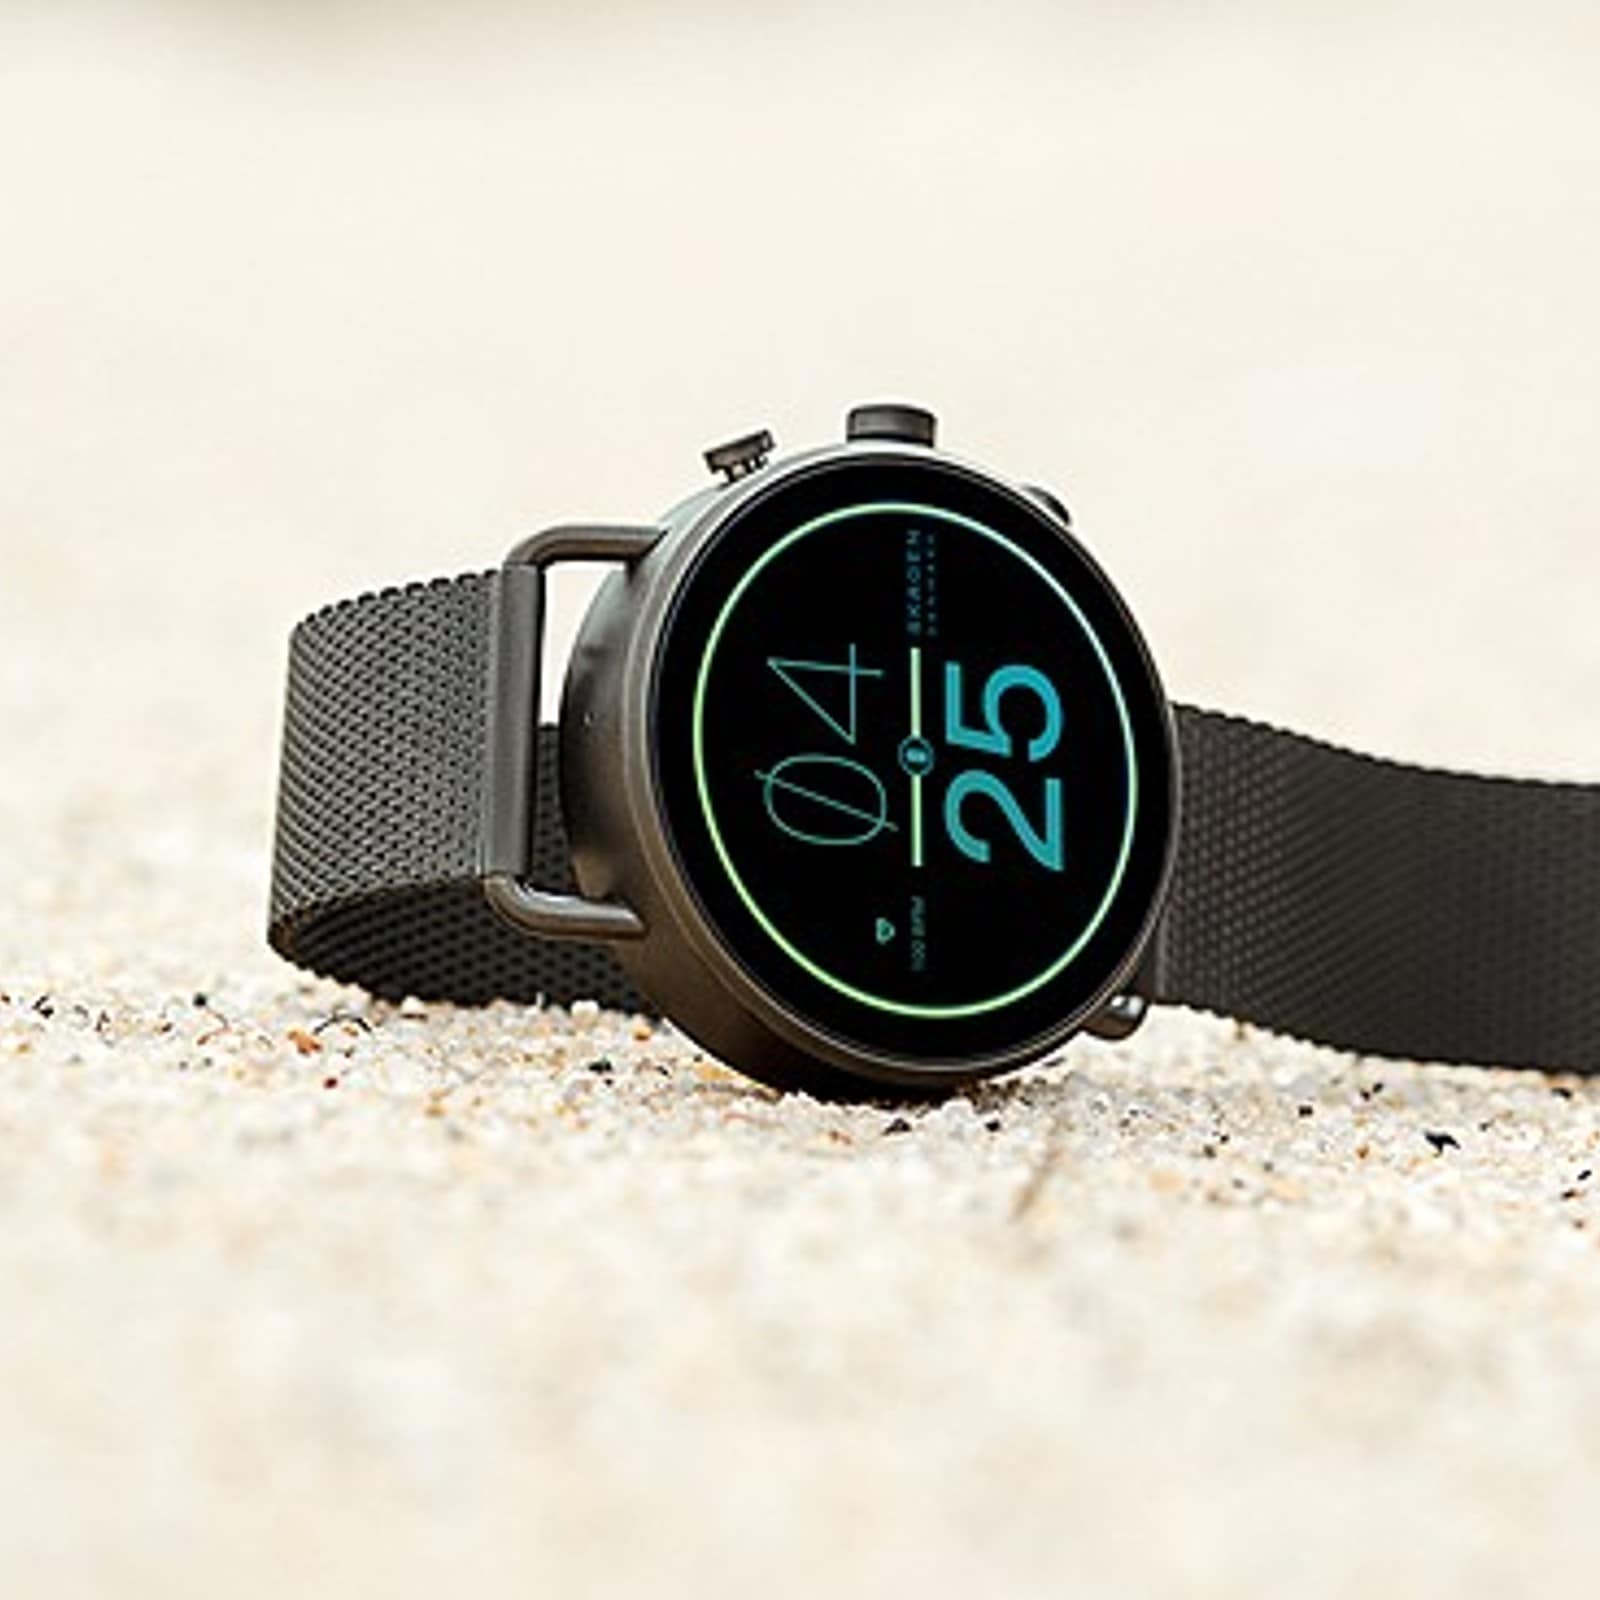 Google is trying everything to improve battery life of Wear OS smartwatches